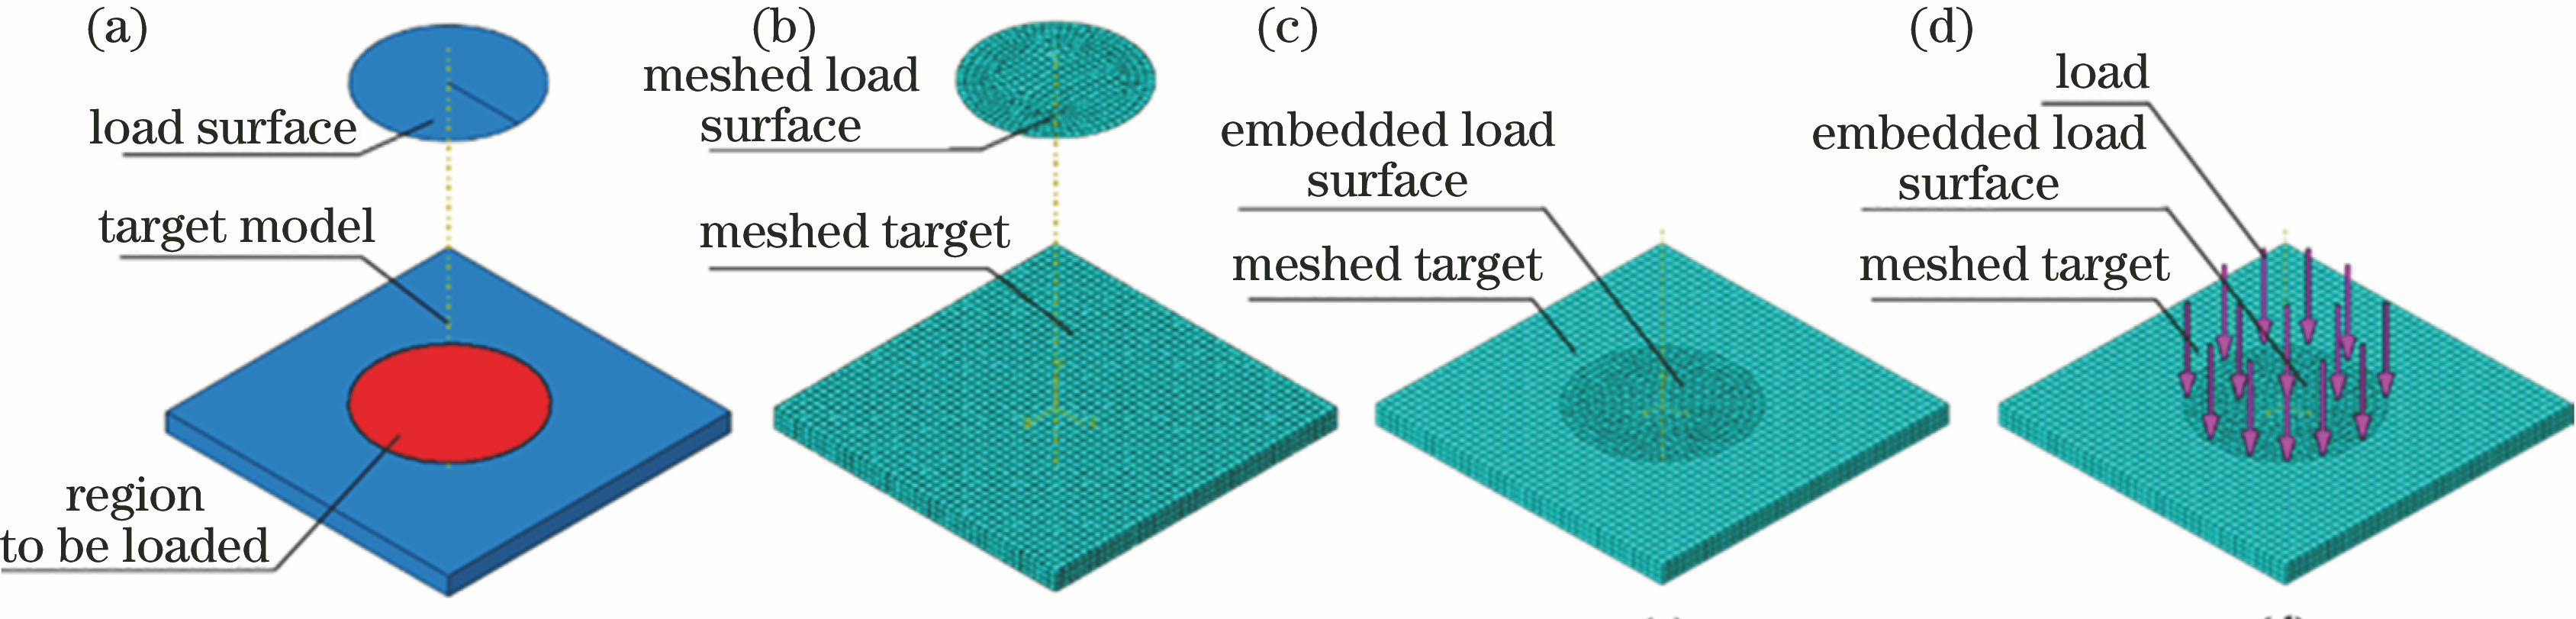 Principle of load region set with embedded surface. (a) Establishment of model; (b) mesh partition; (c) embedment of load surface; (d) embedment of load